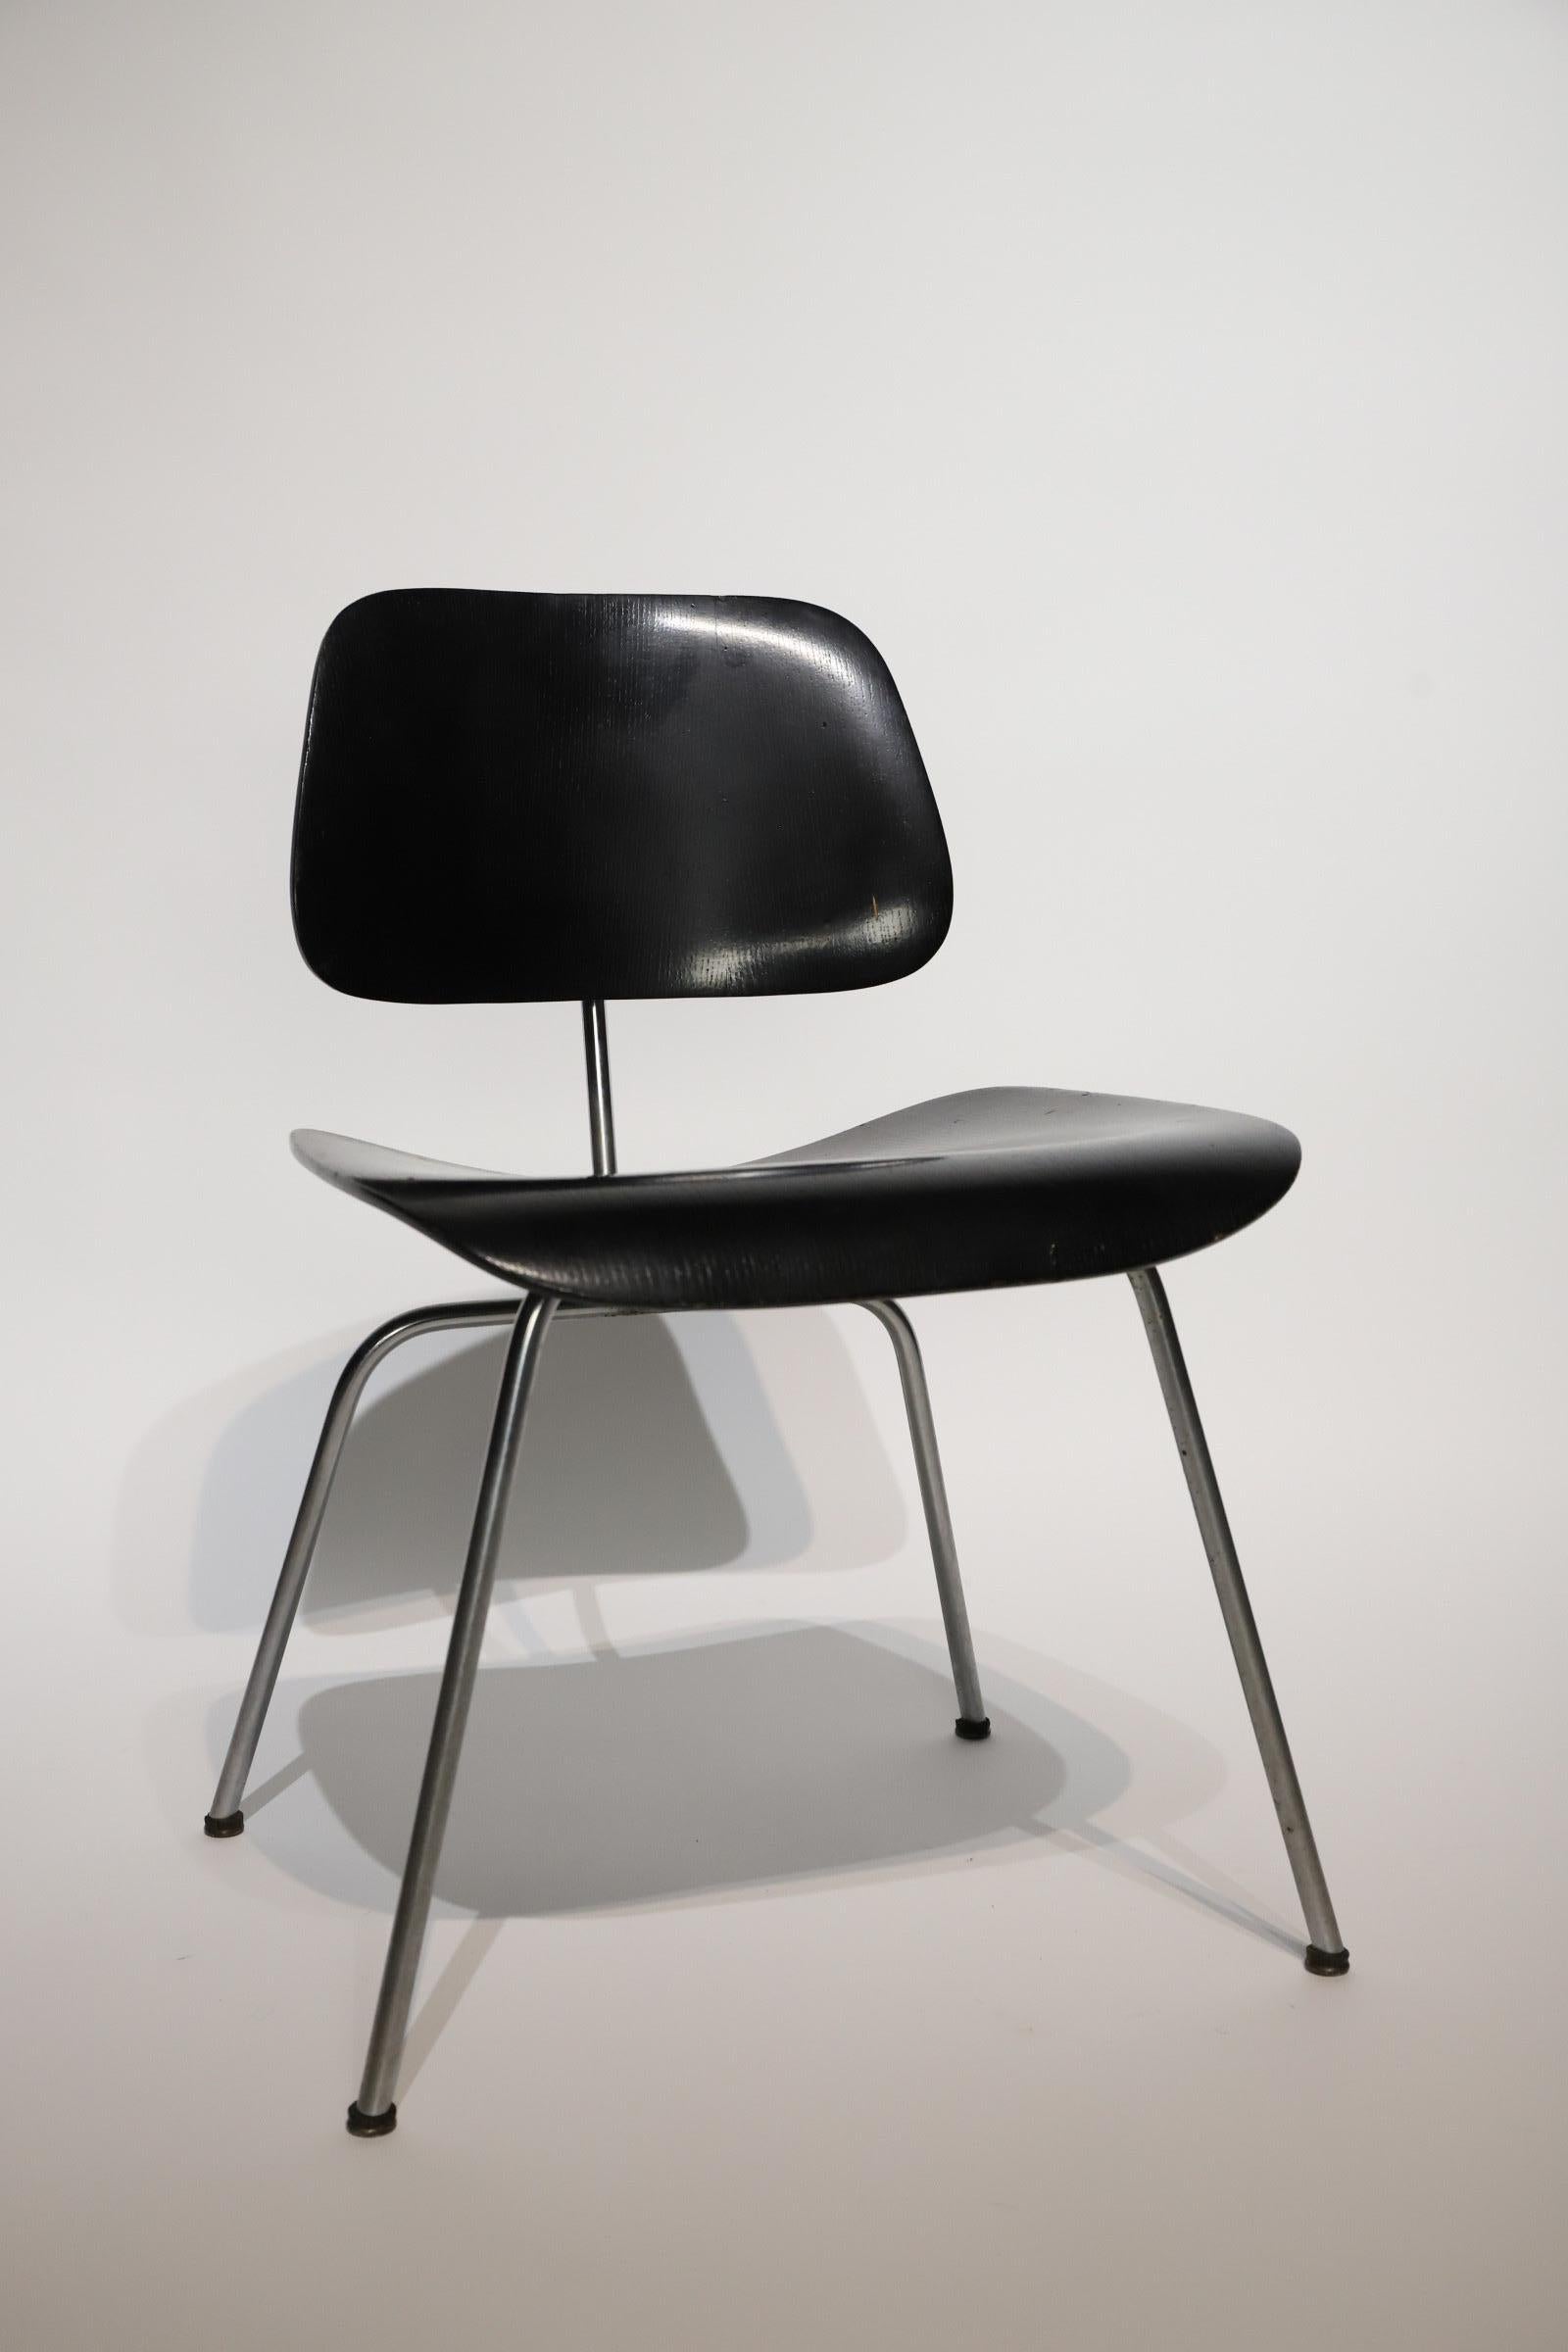 North American Early Eames DCM for Herman Miller